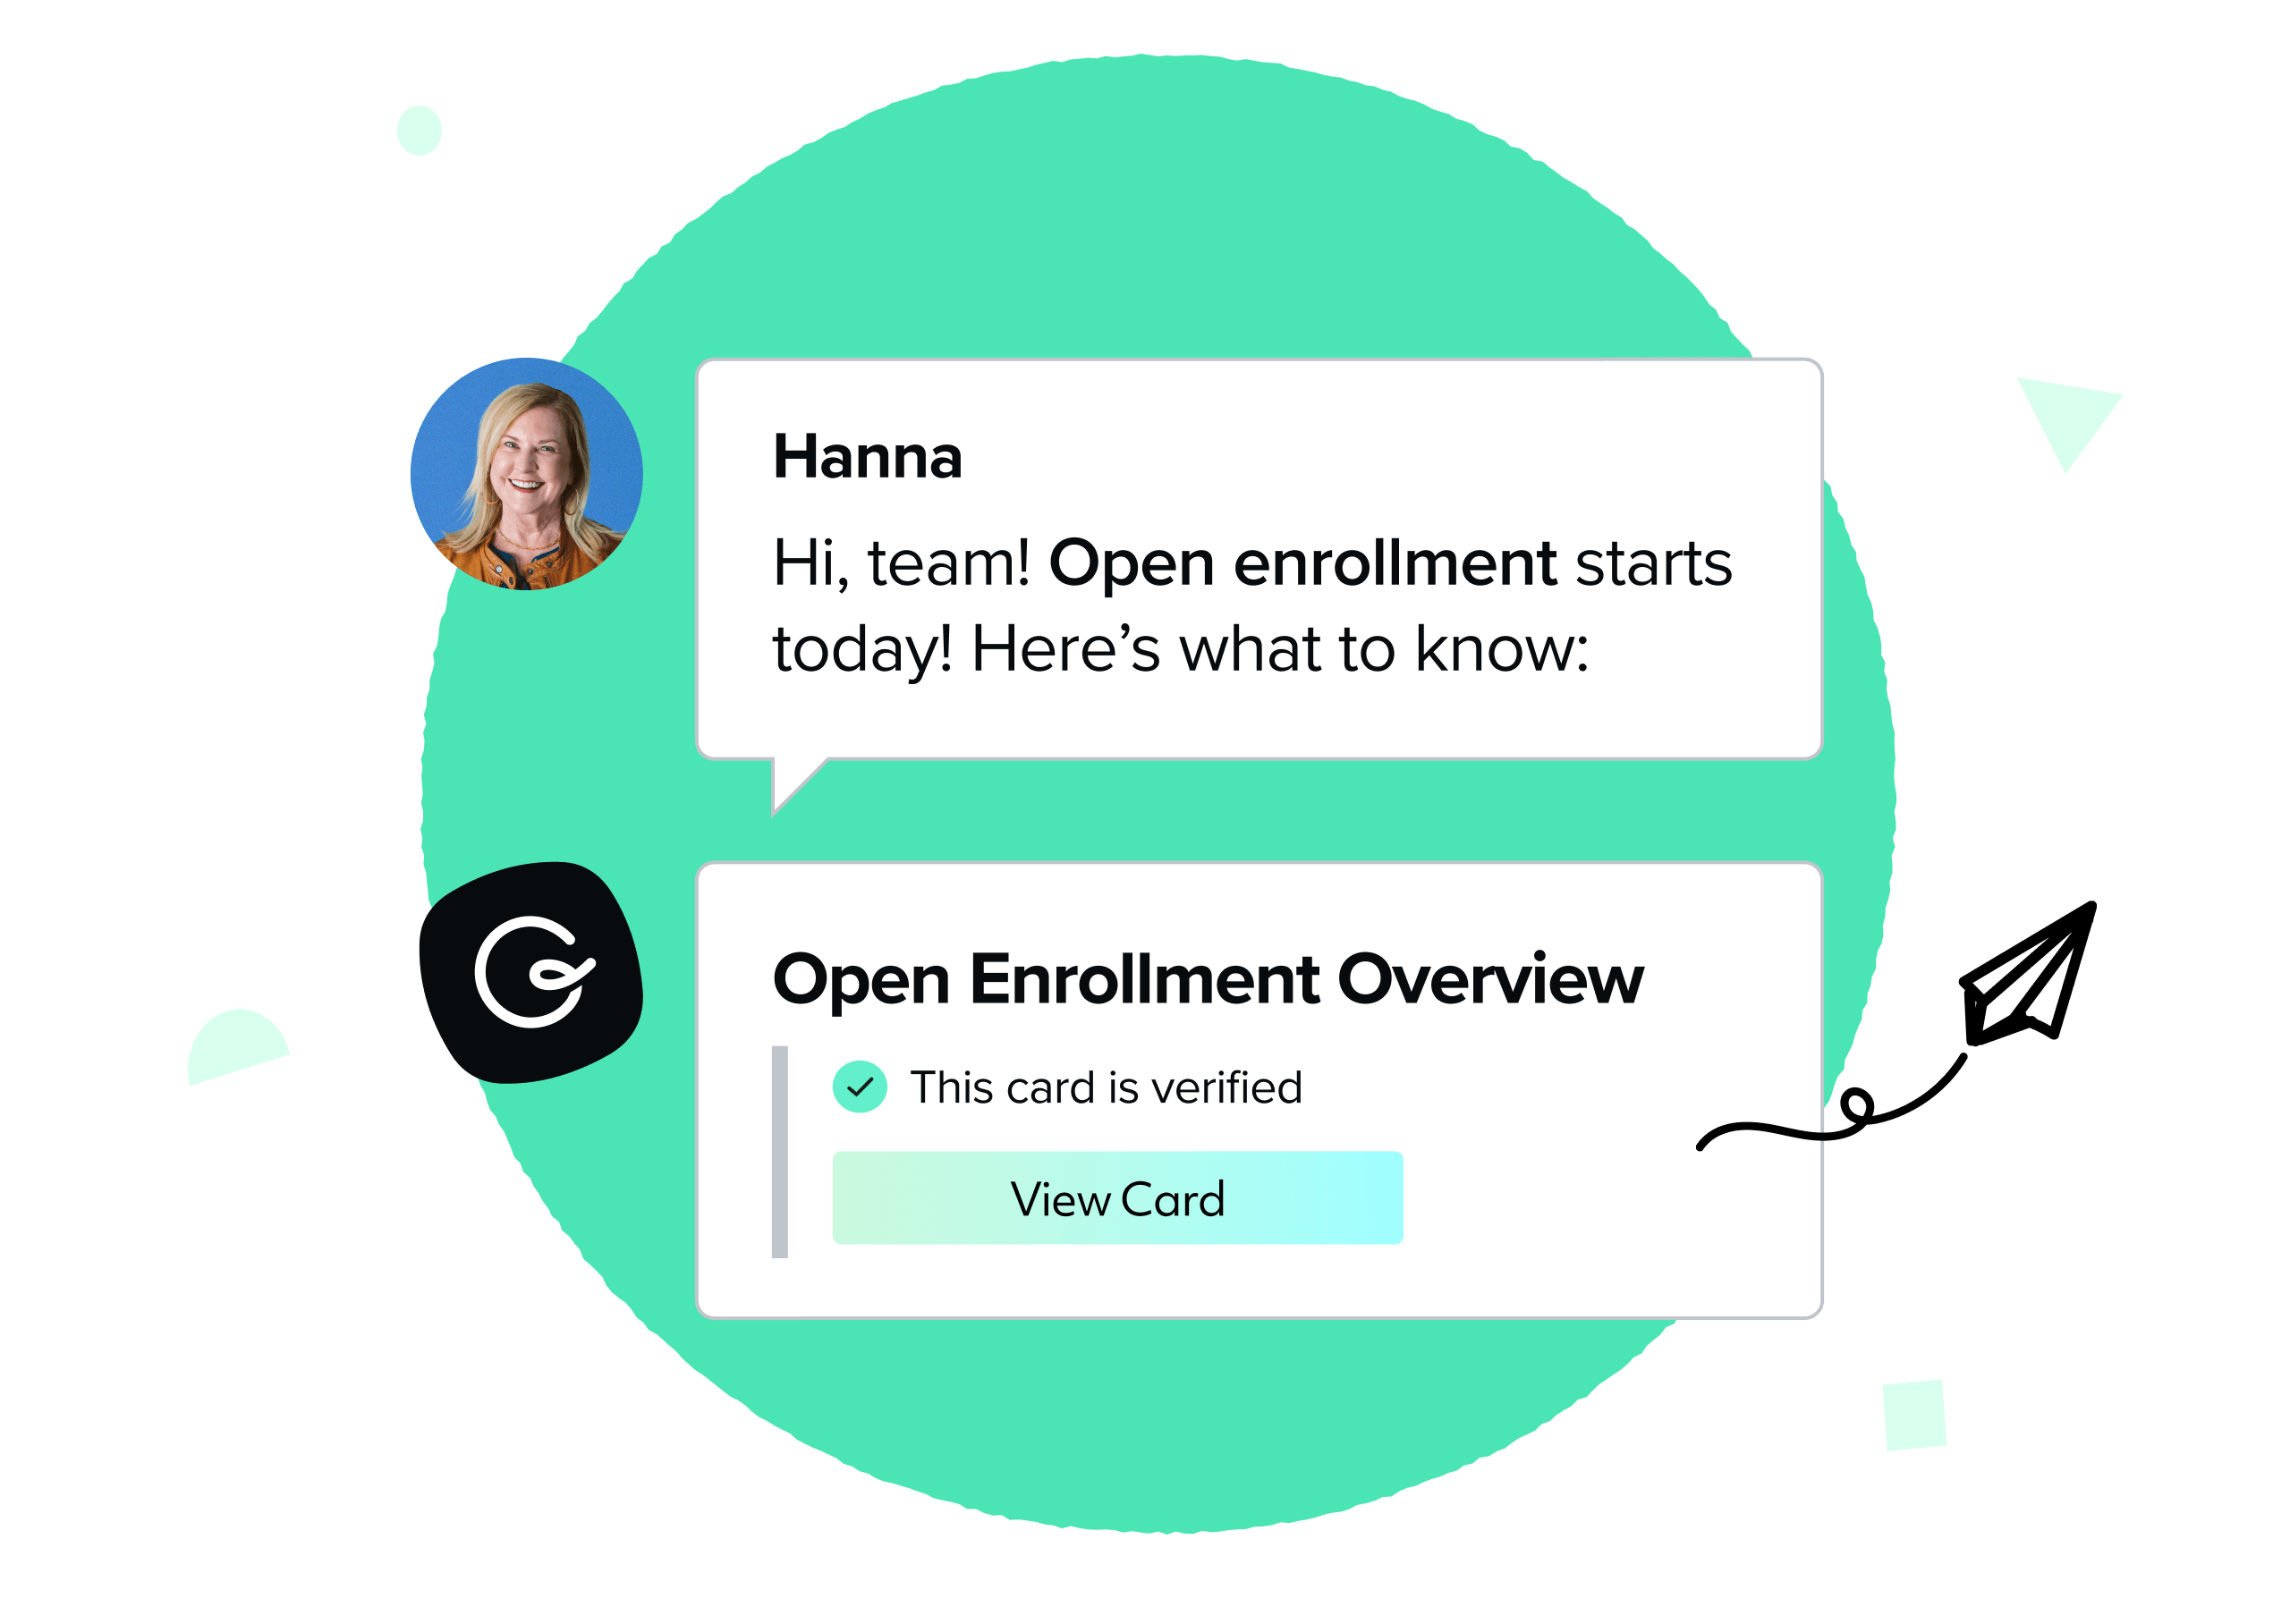 Guru being used to surface an Open Enrollment Overview directly in Slack